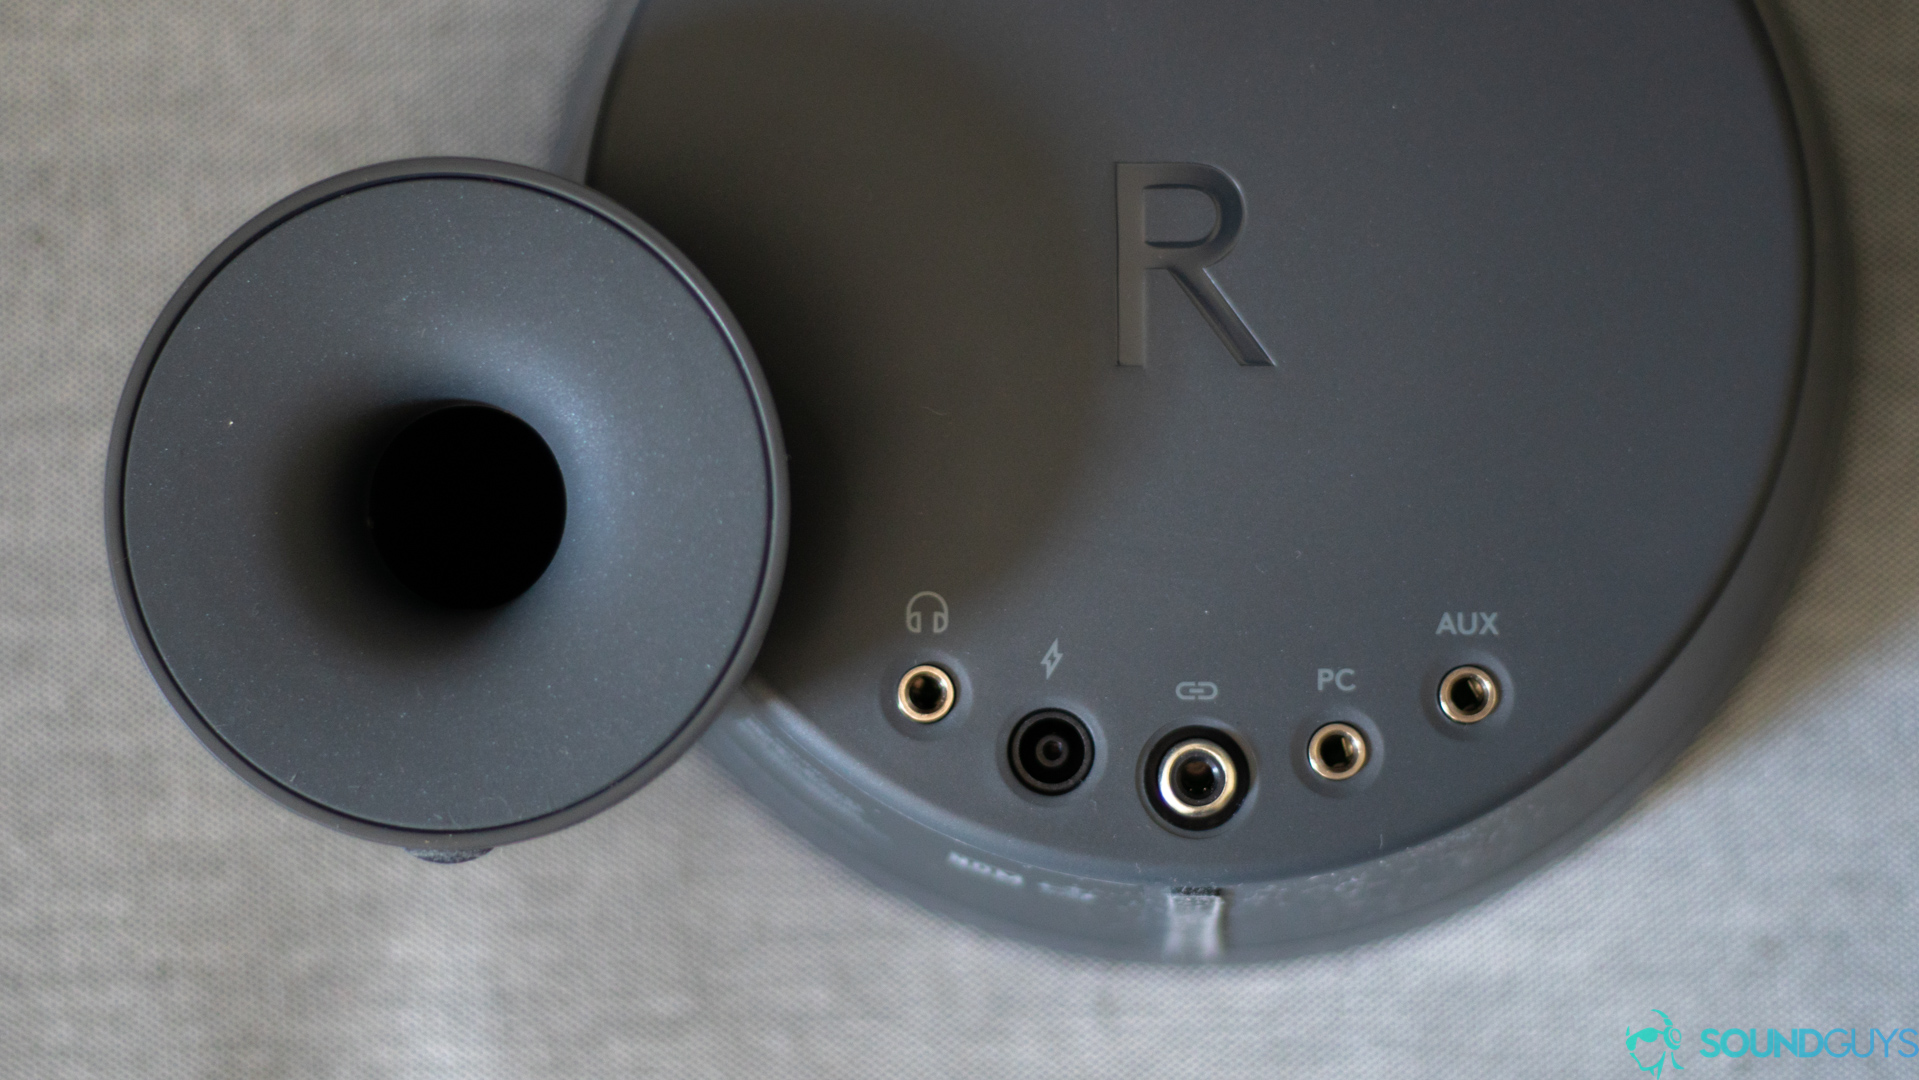 The right speaker has all of the 3.5mm inputs and a headphone jack on the back. 